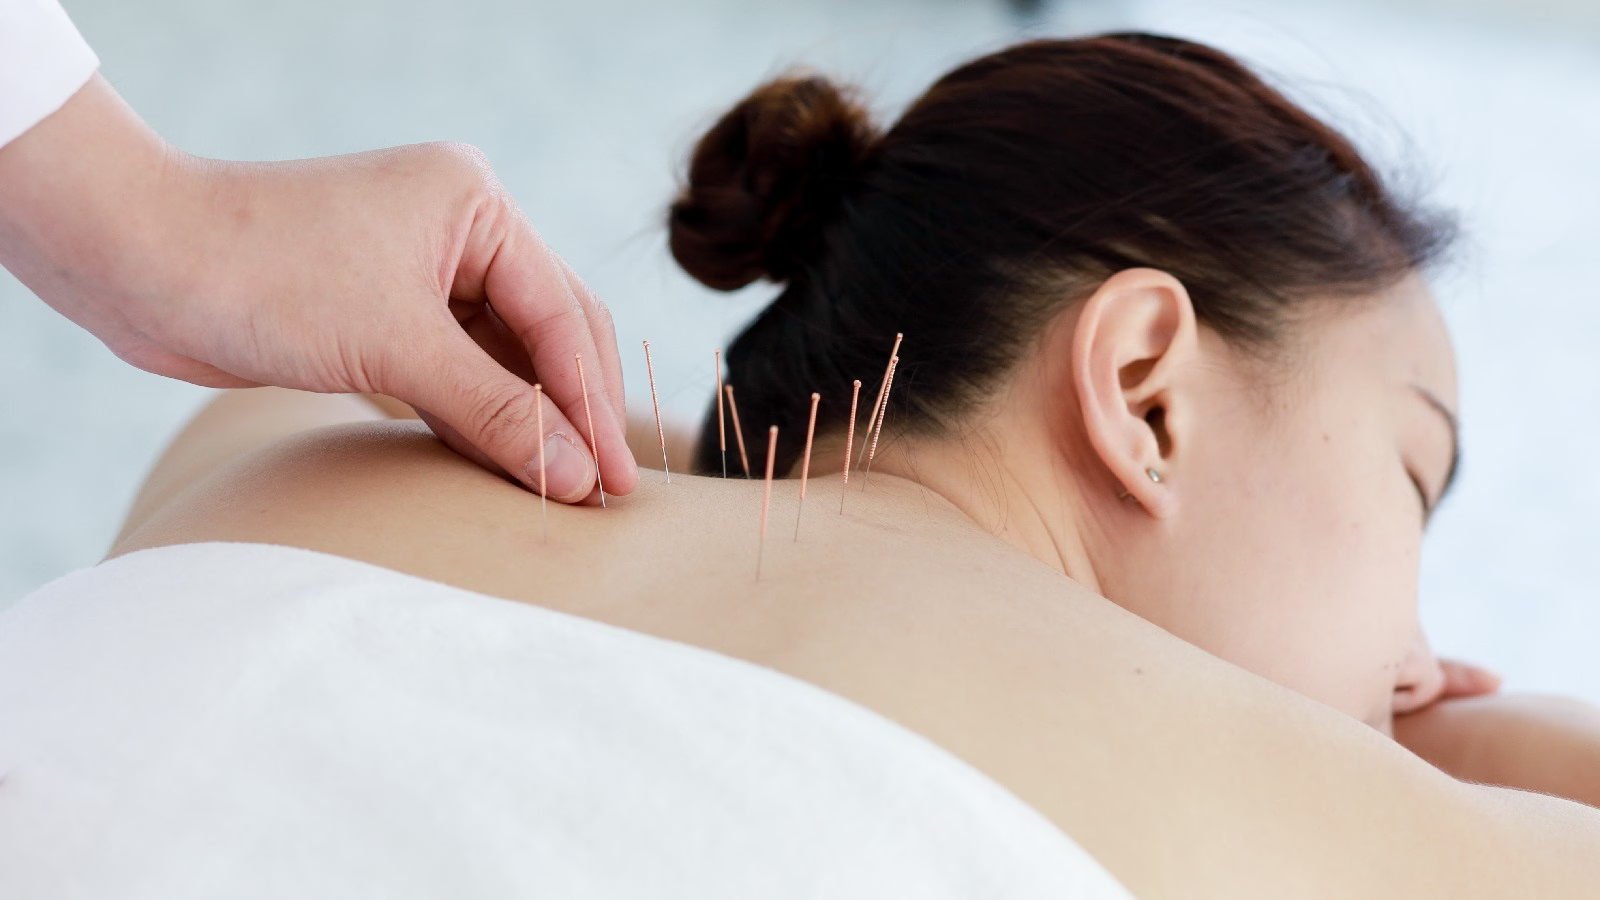 Discover Acupuncture In Ridgefield CT: Boost Health In Ridgefield, CT - Newsideas.in Discover Acupuncture In Ridgefield CT: Boost Health In Ridgefield, CT